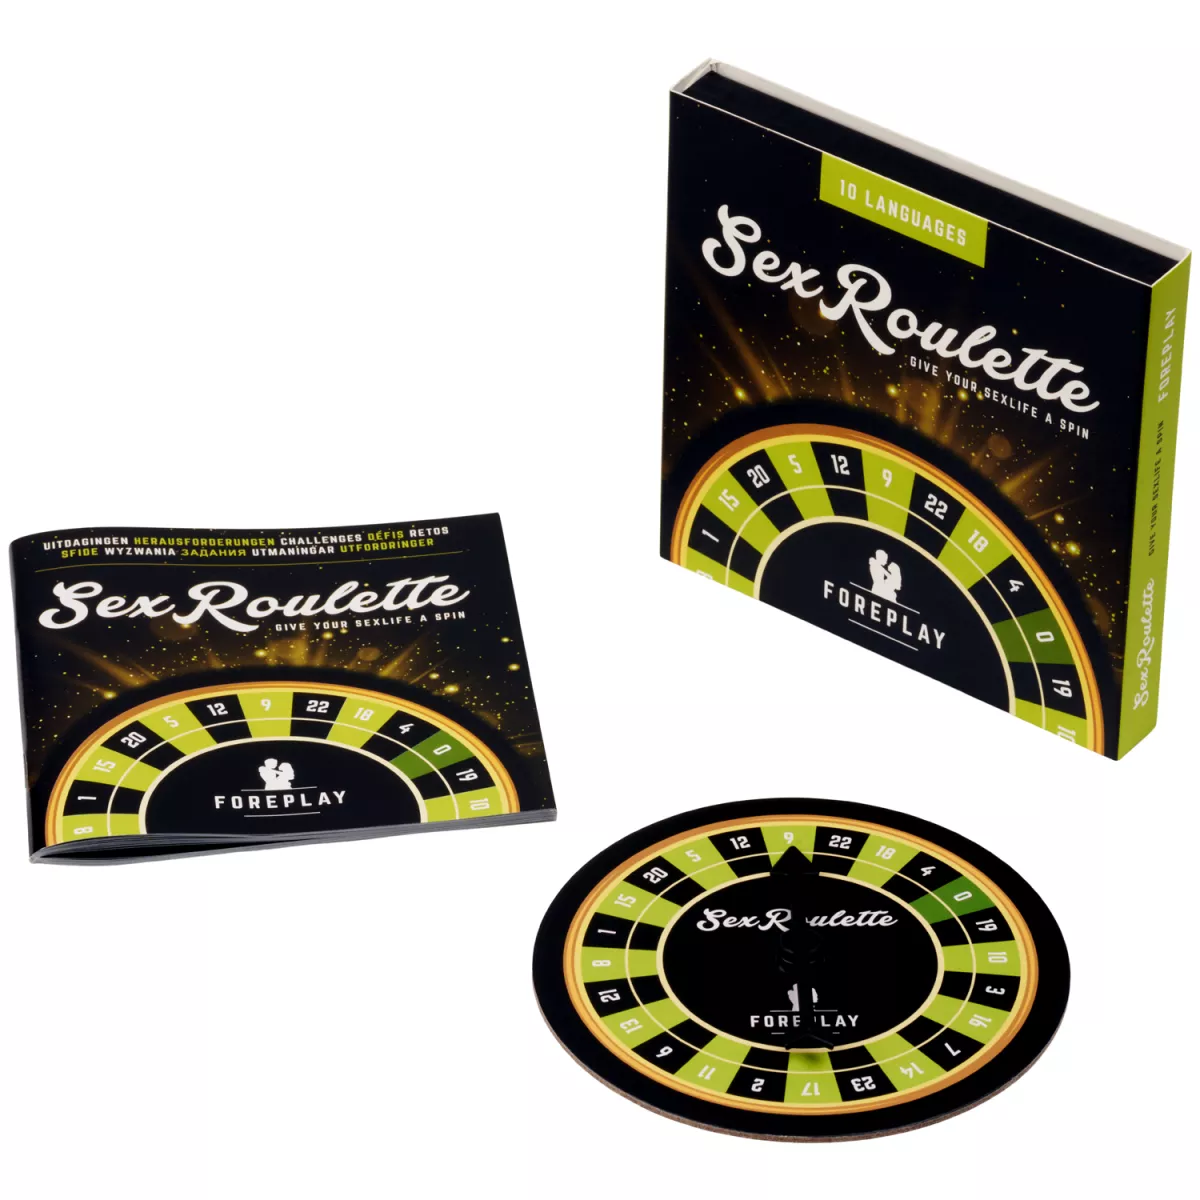 #2 - Tease & Please Sex Roulette Foreplay Spil      - Sort